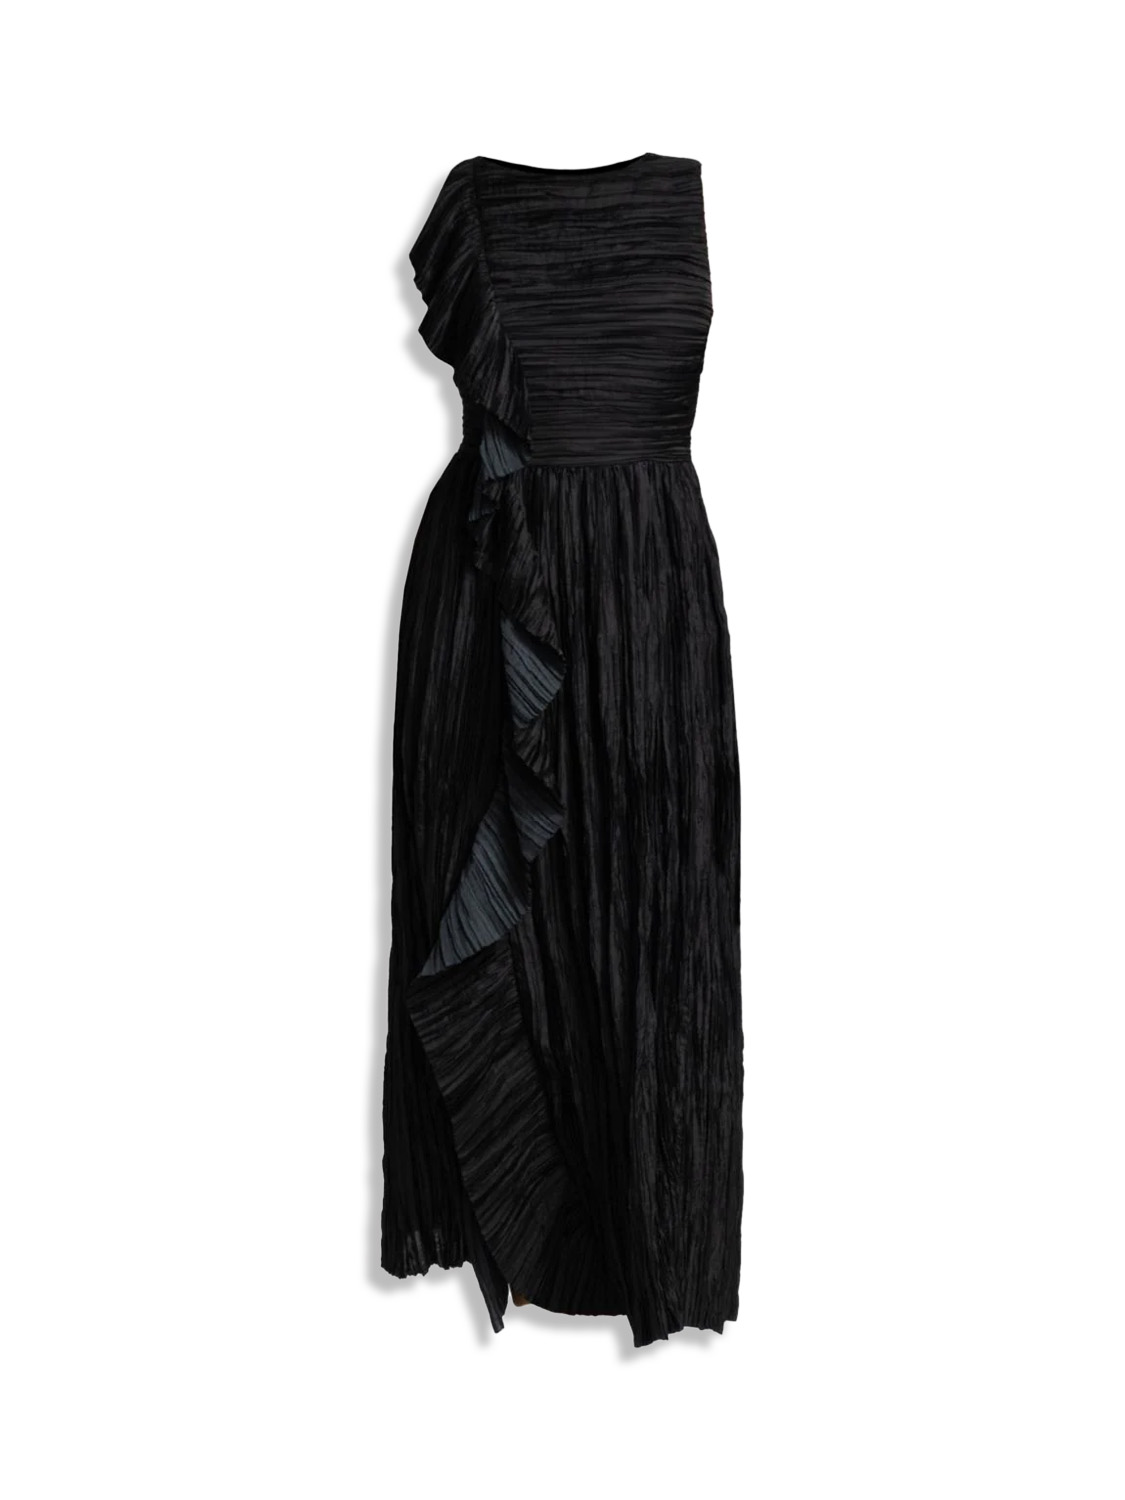 Circe Gown - Maxi dress with ruffles